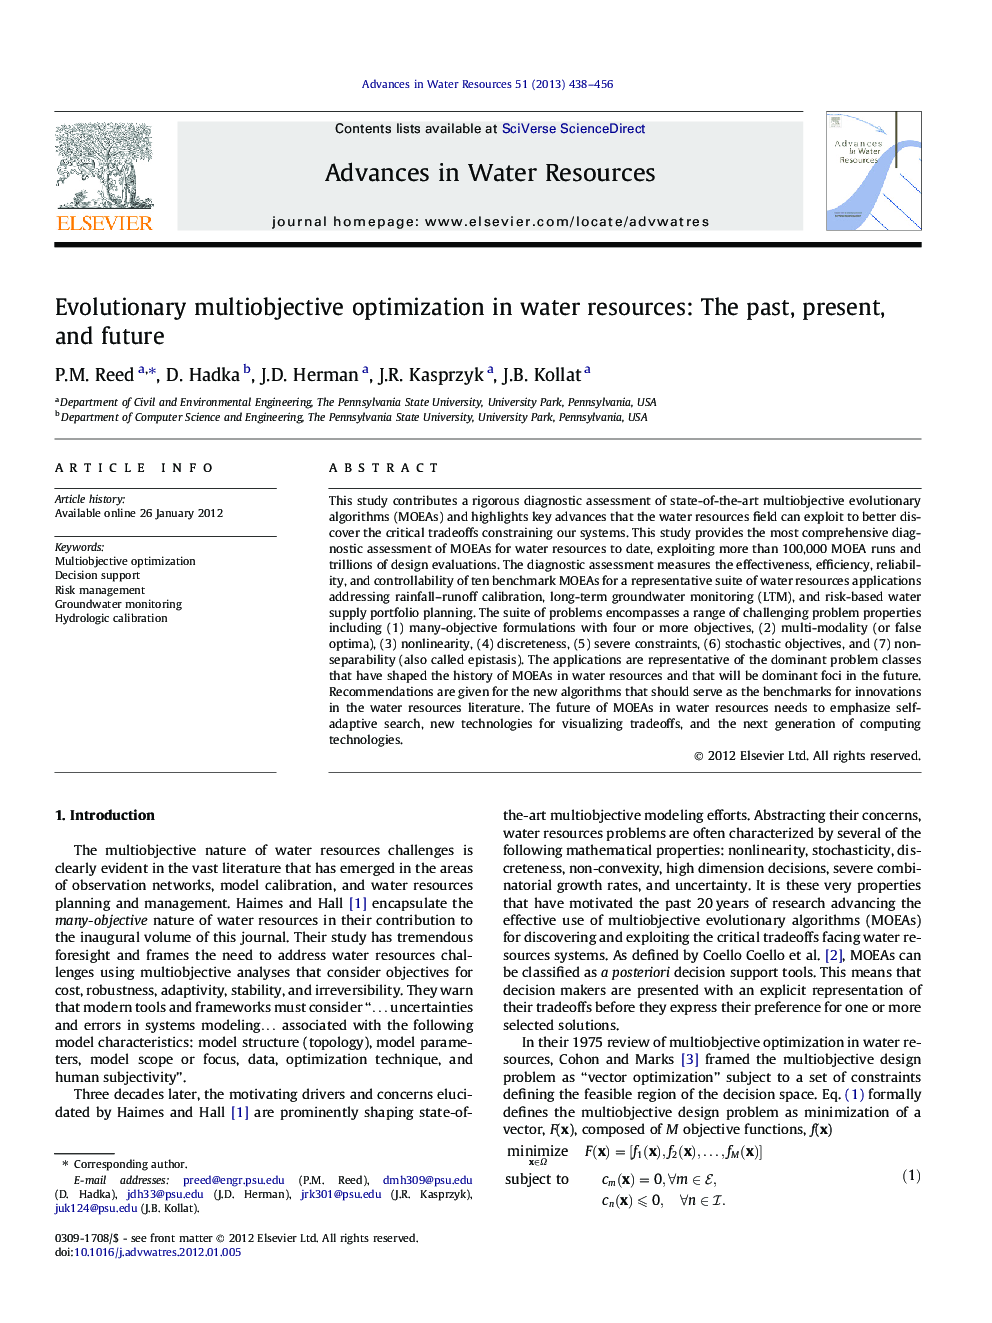 Evolutionary multiobjective optimization in water resources: The past, present, and future